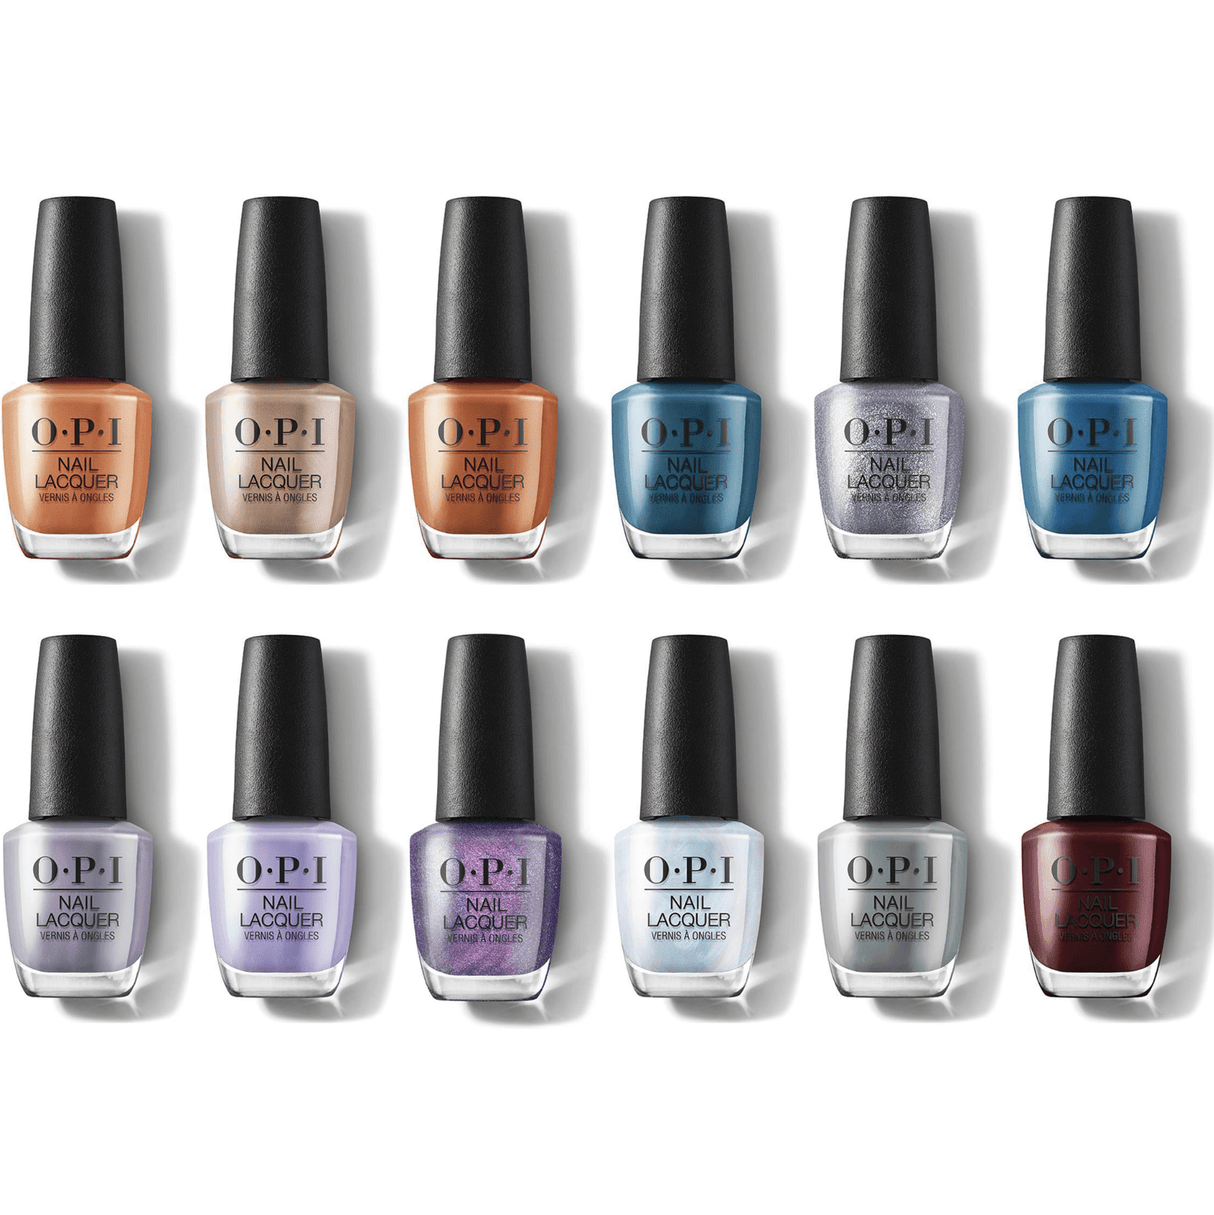 OPI Nail Lacquer Collection 2020 Fall MUSE OF MILAN